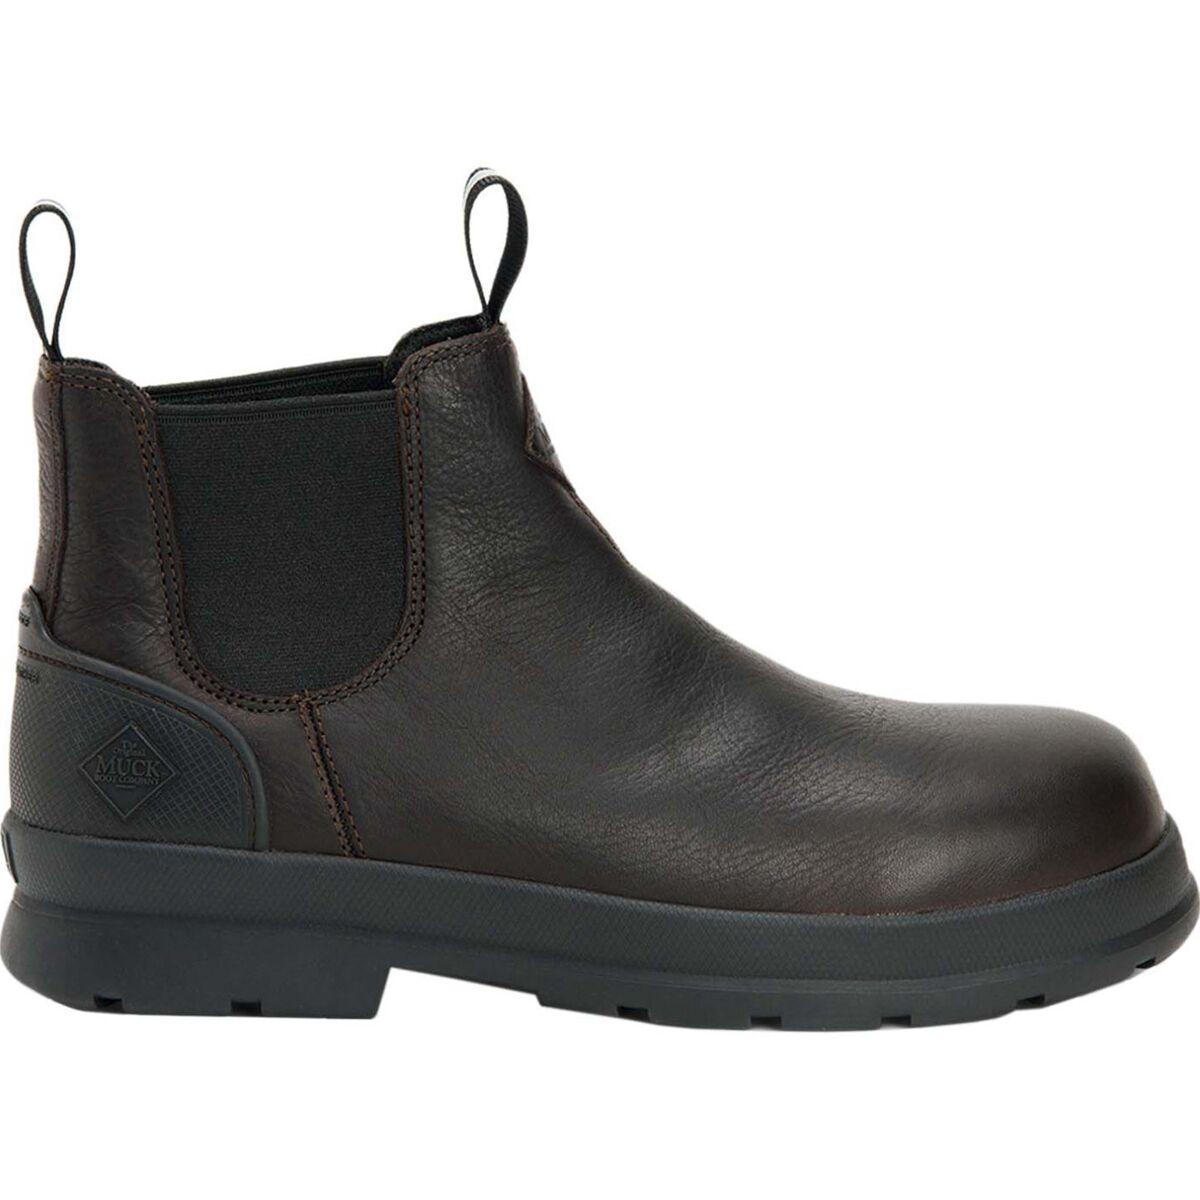 Muck Boots Chore Farm Leather Chelsea CT Med Boot - Men's